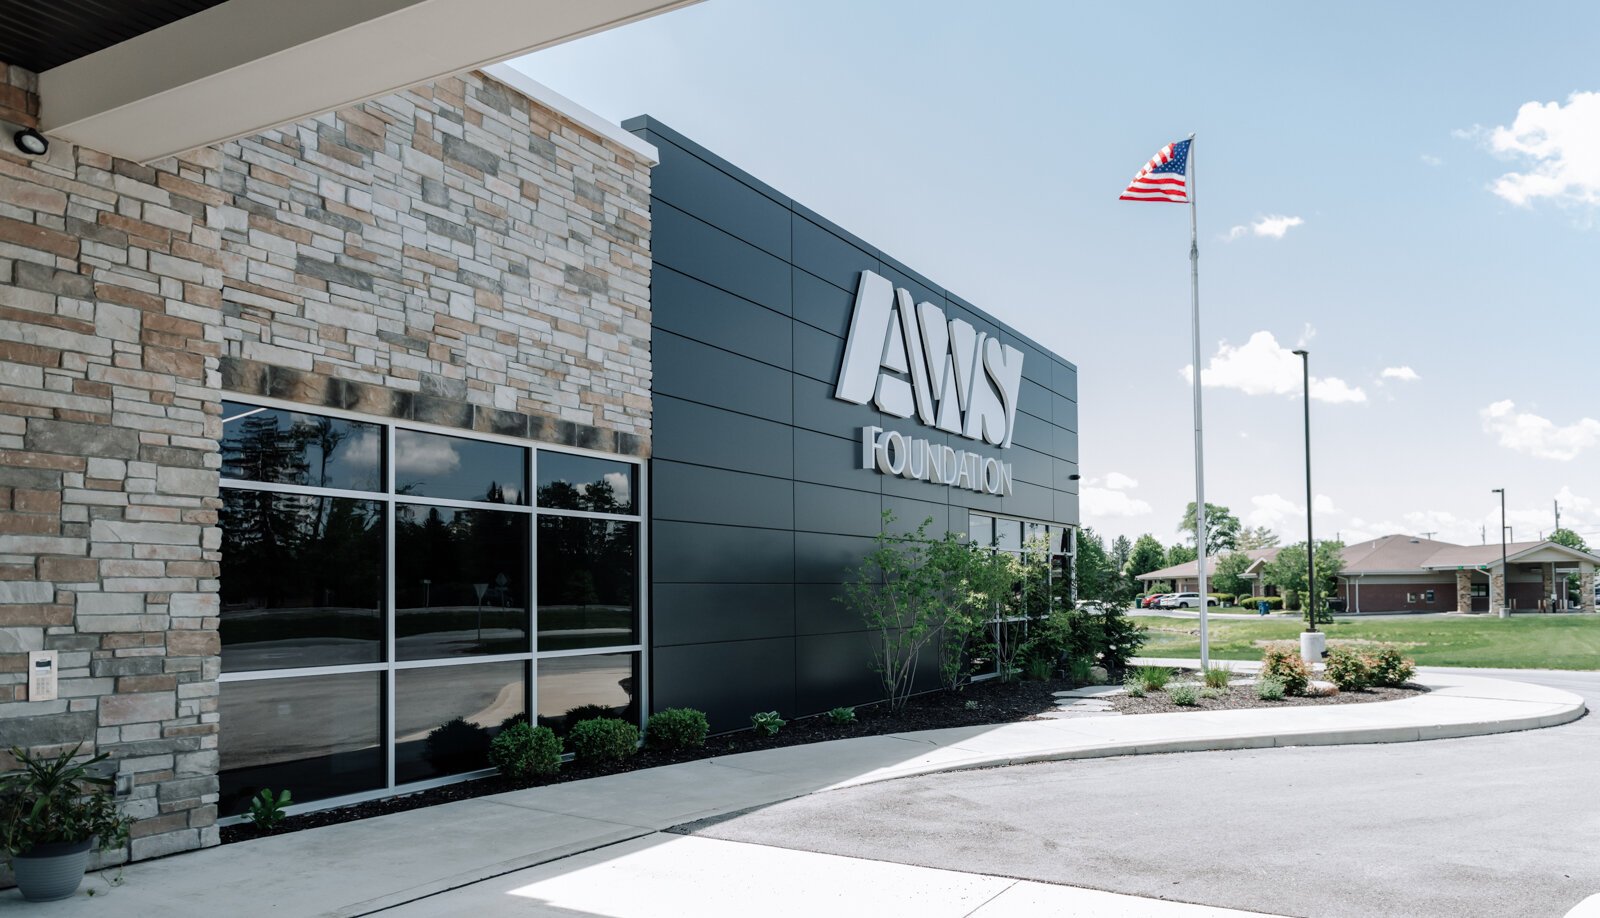 Exterior of the AWS Foundation, 5323 W Jefferson Blvd, Fort Wayne, IN 46804. 